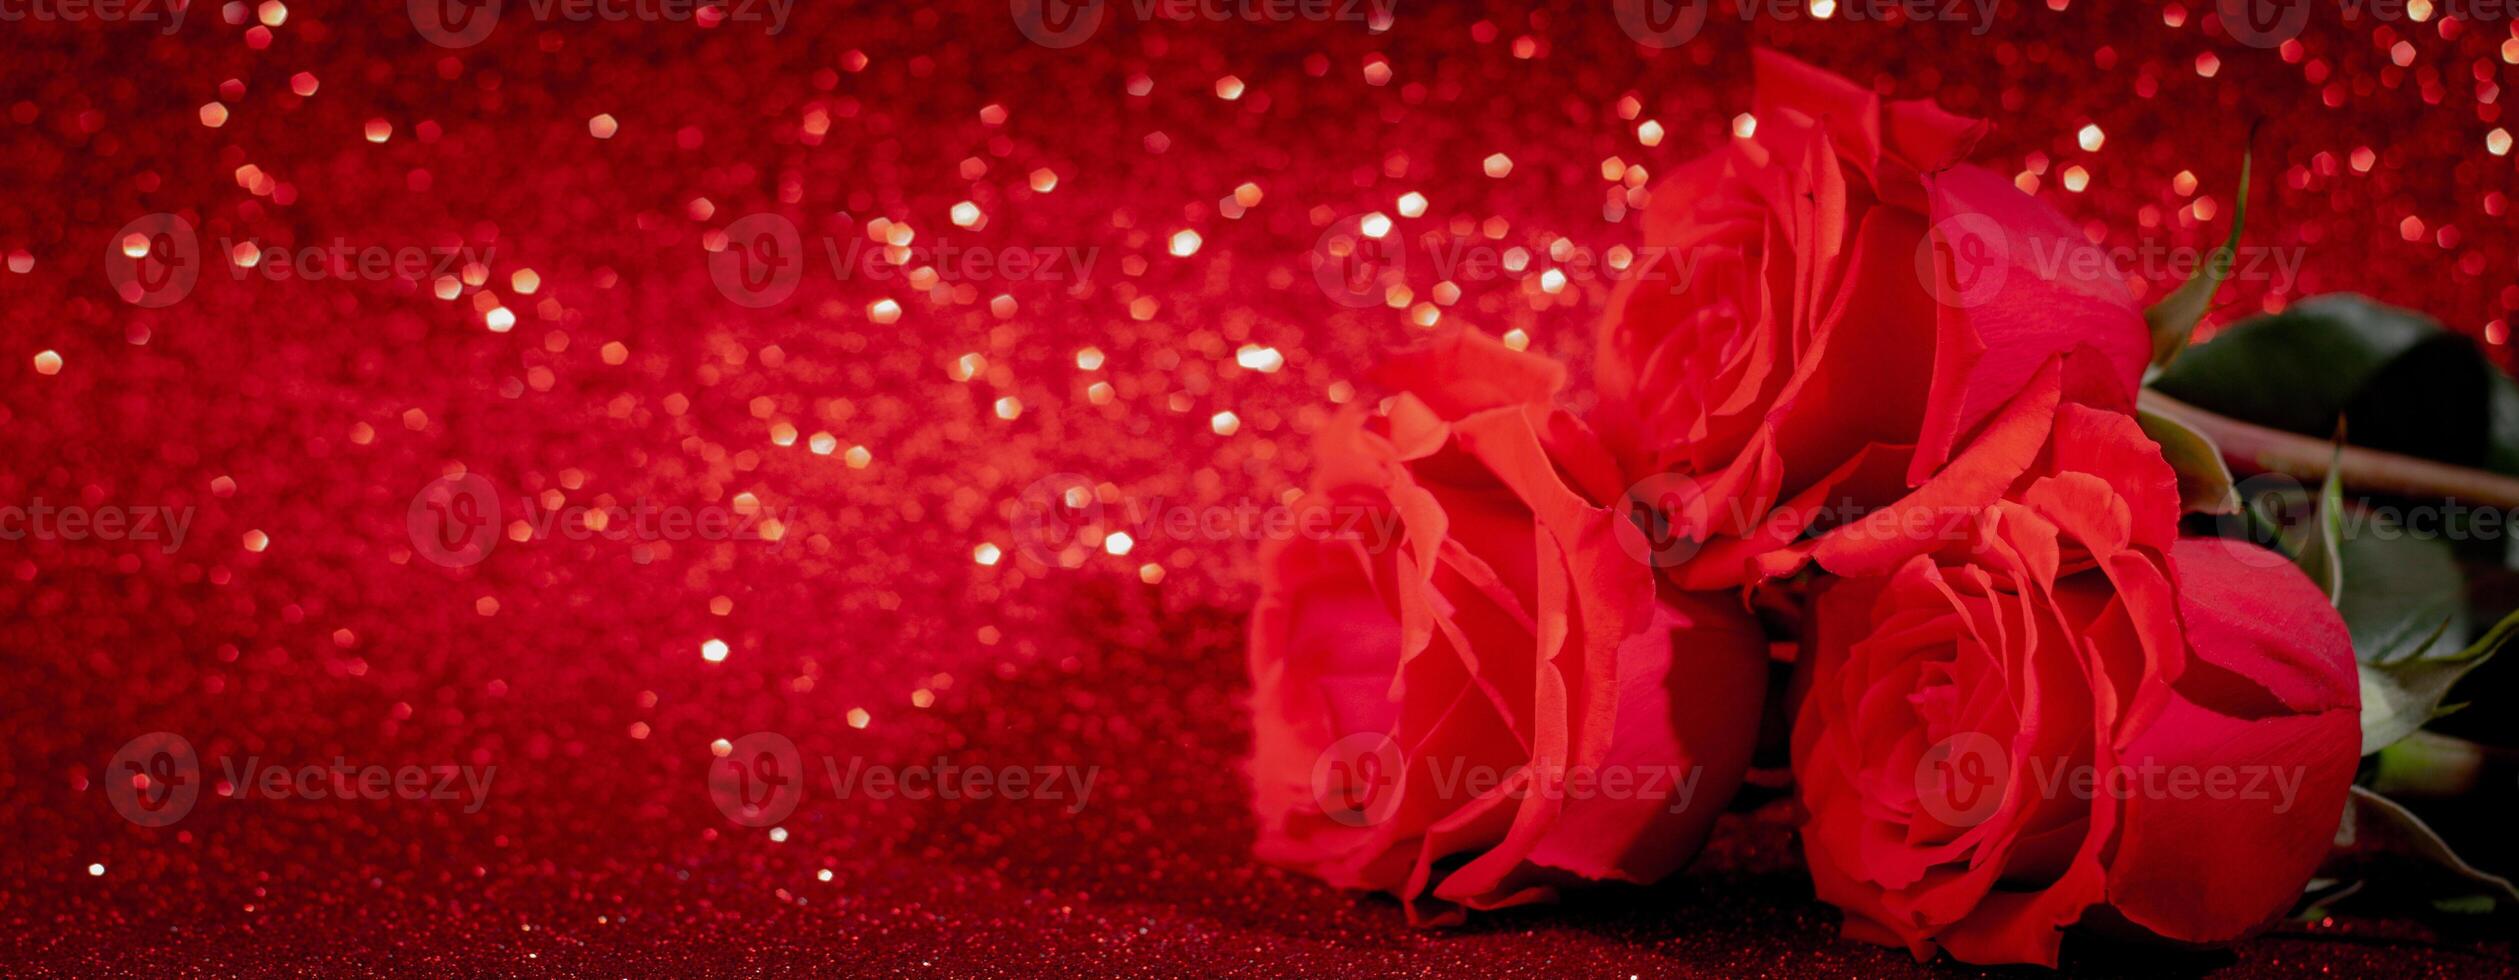 Bouquet of red roses on a shiny bokeh background. Valentine's day concept, place for text. photo